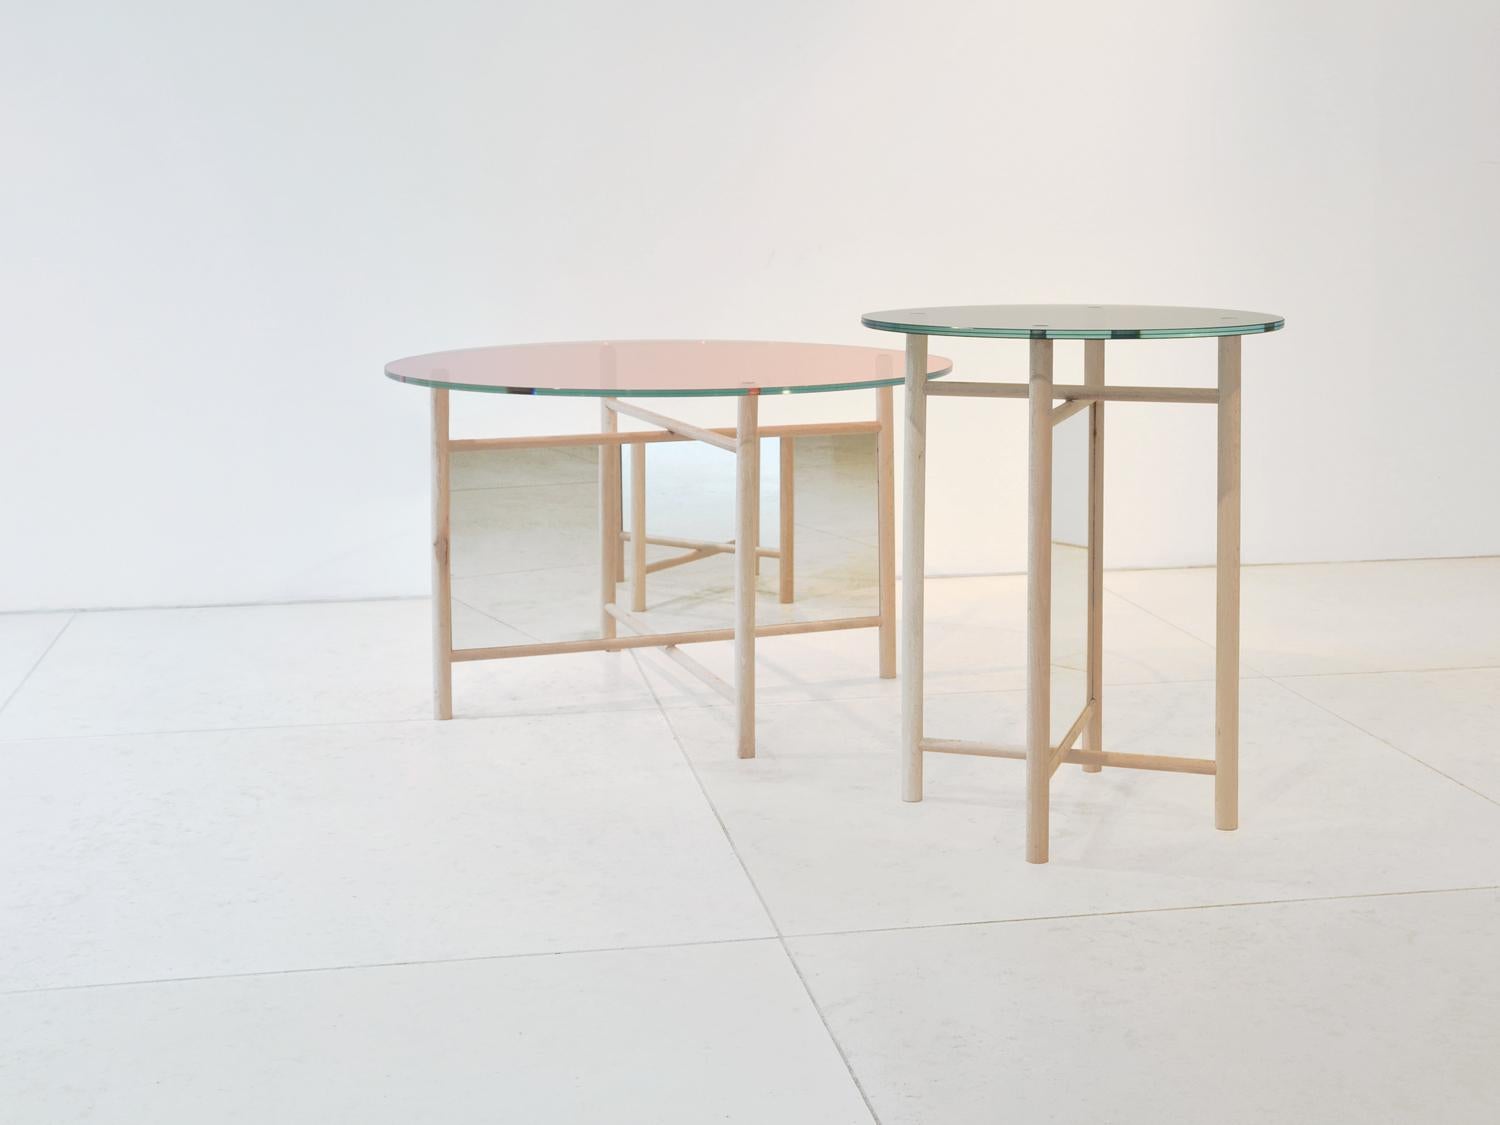 Set of Elias and Son tables by Llot Llov
Dimensions: 
Elias: Ø 80 x H: 50 cm
Son: Ø 48 x H 60 cm
Materials: Beech, mirror, glass

If you look at the ELIAS and SON tables from afar, the mirrors that are attached within the inner frames are making it